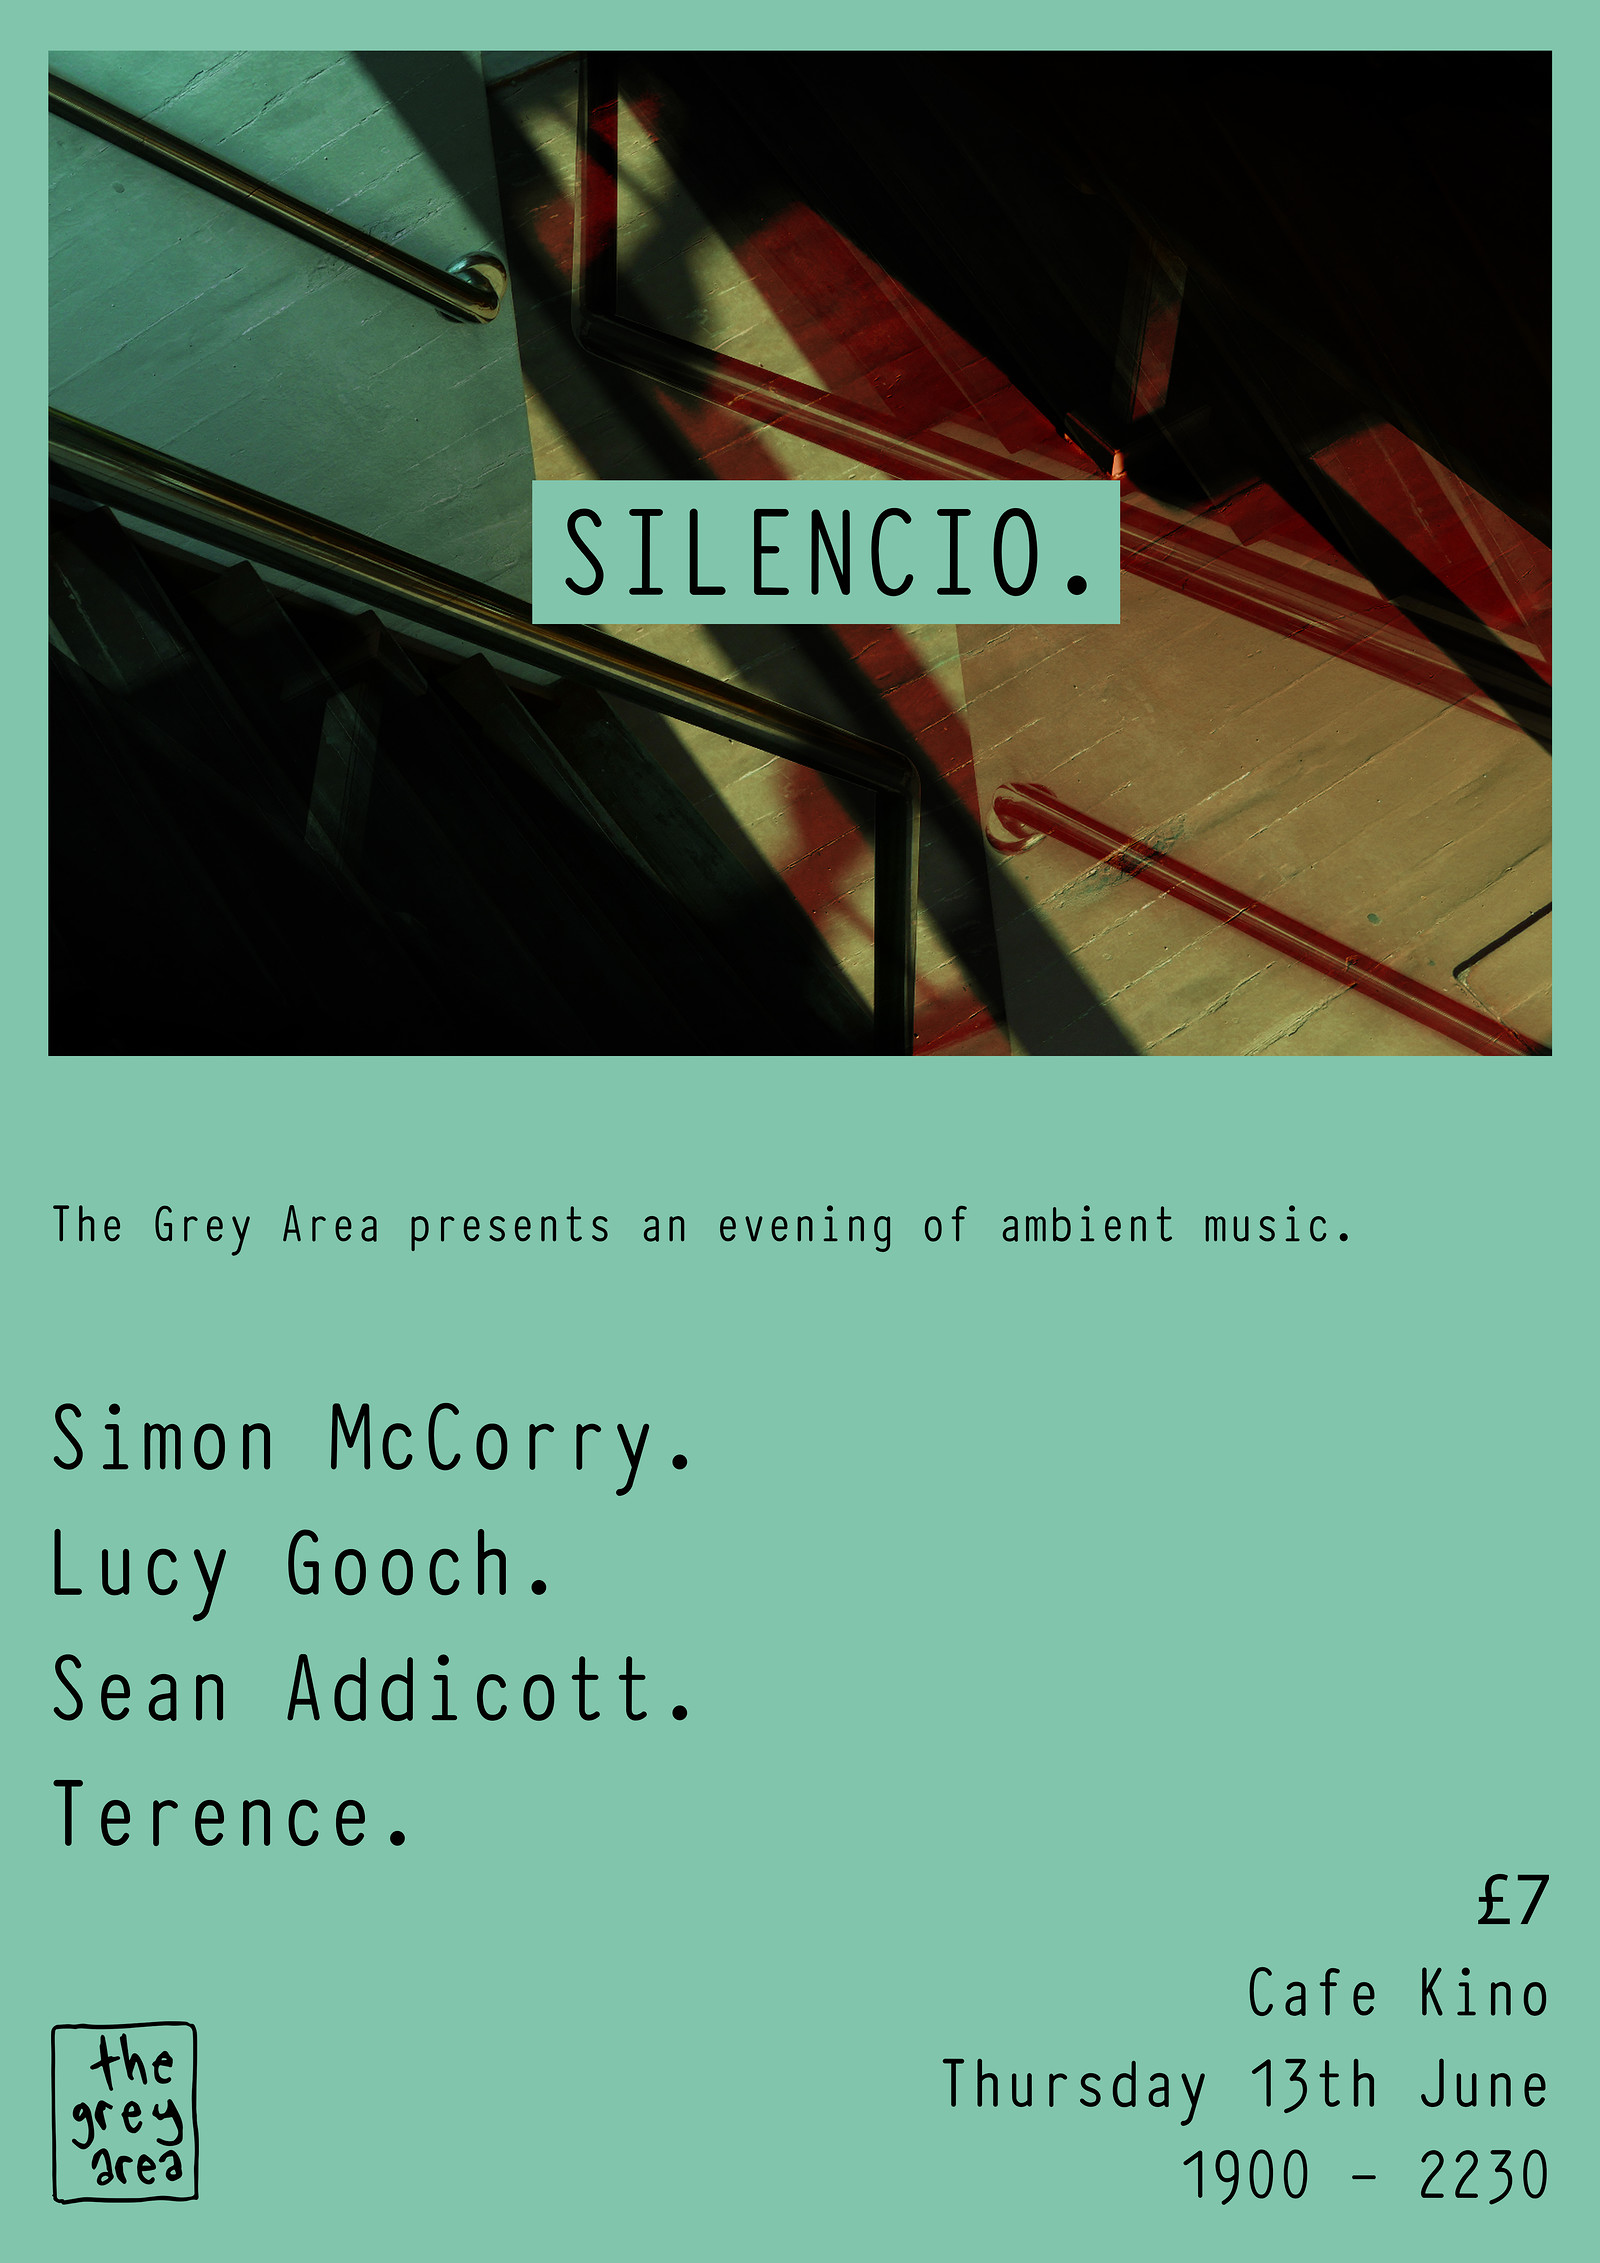 Silencio. An evening of ambient music at Cafe Kino